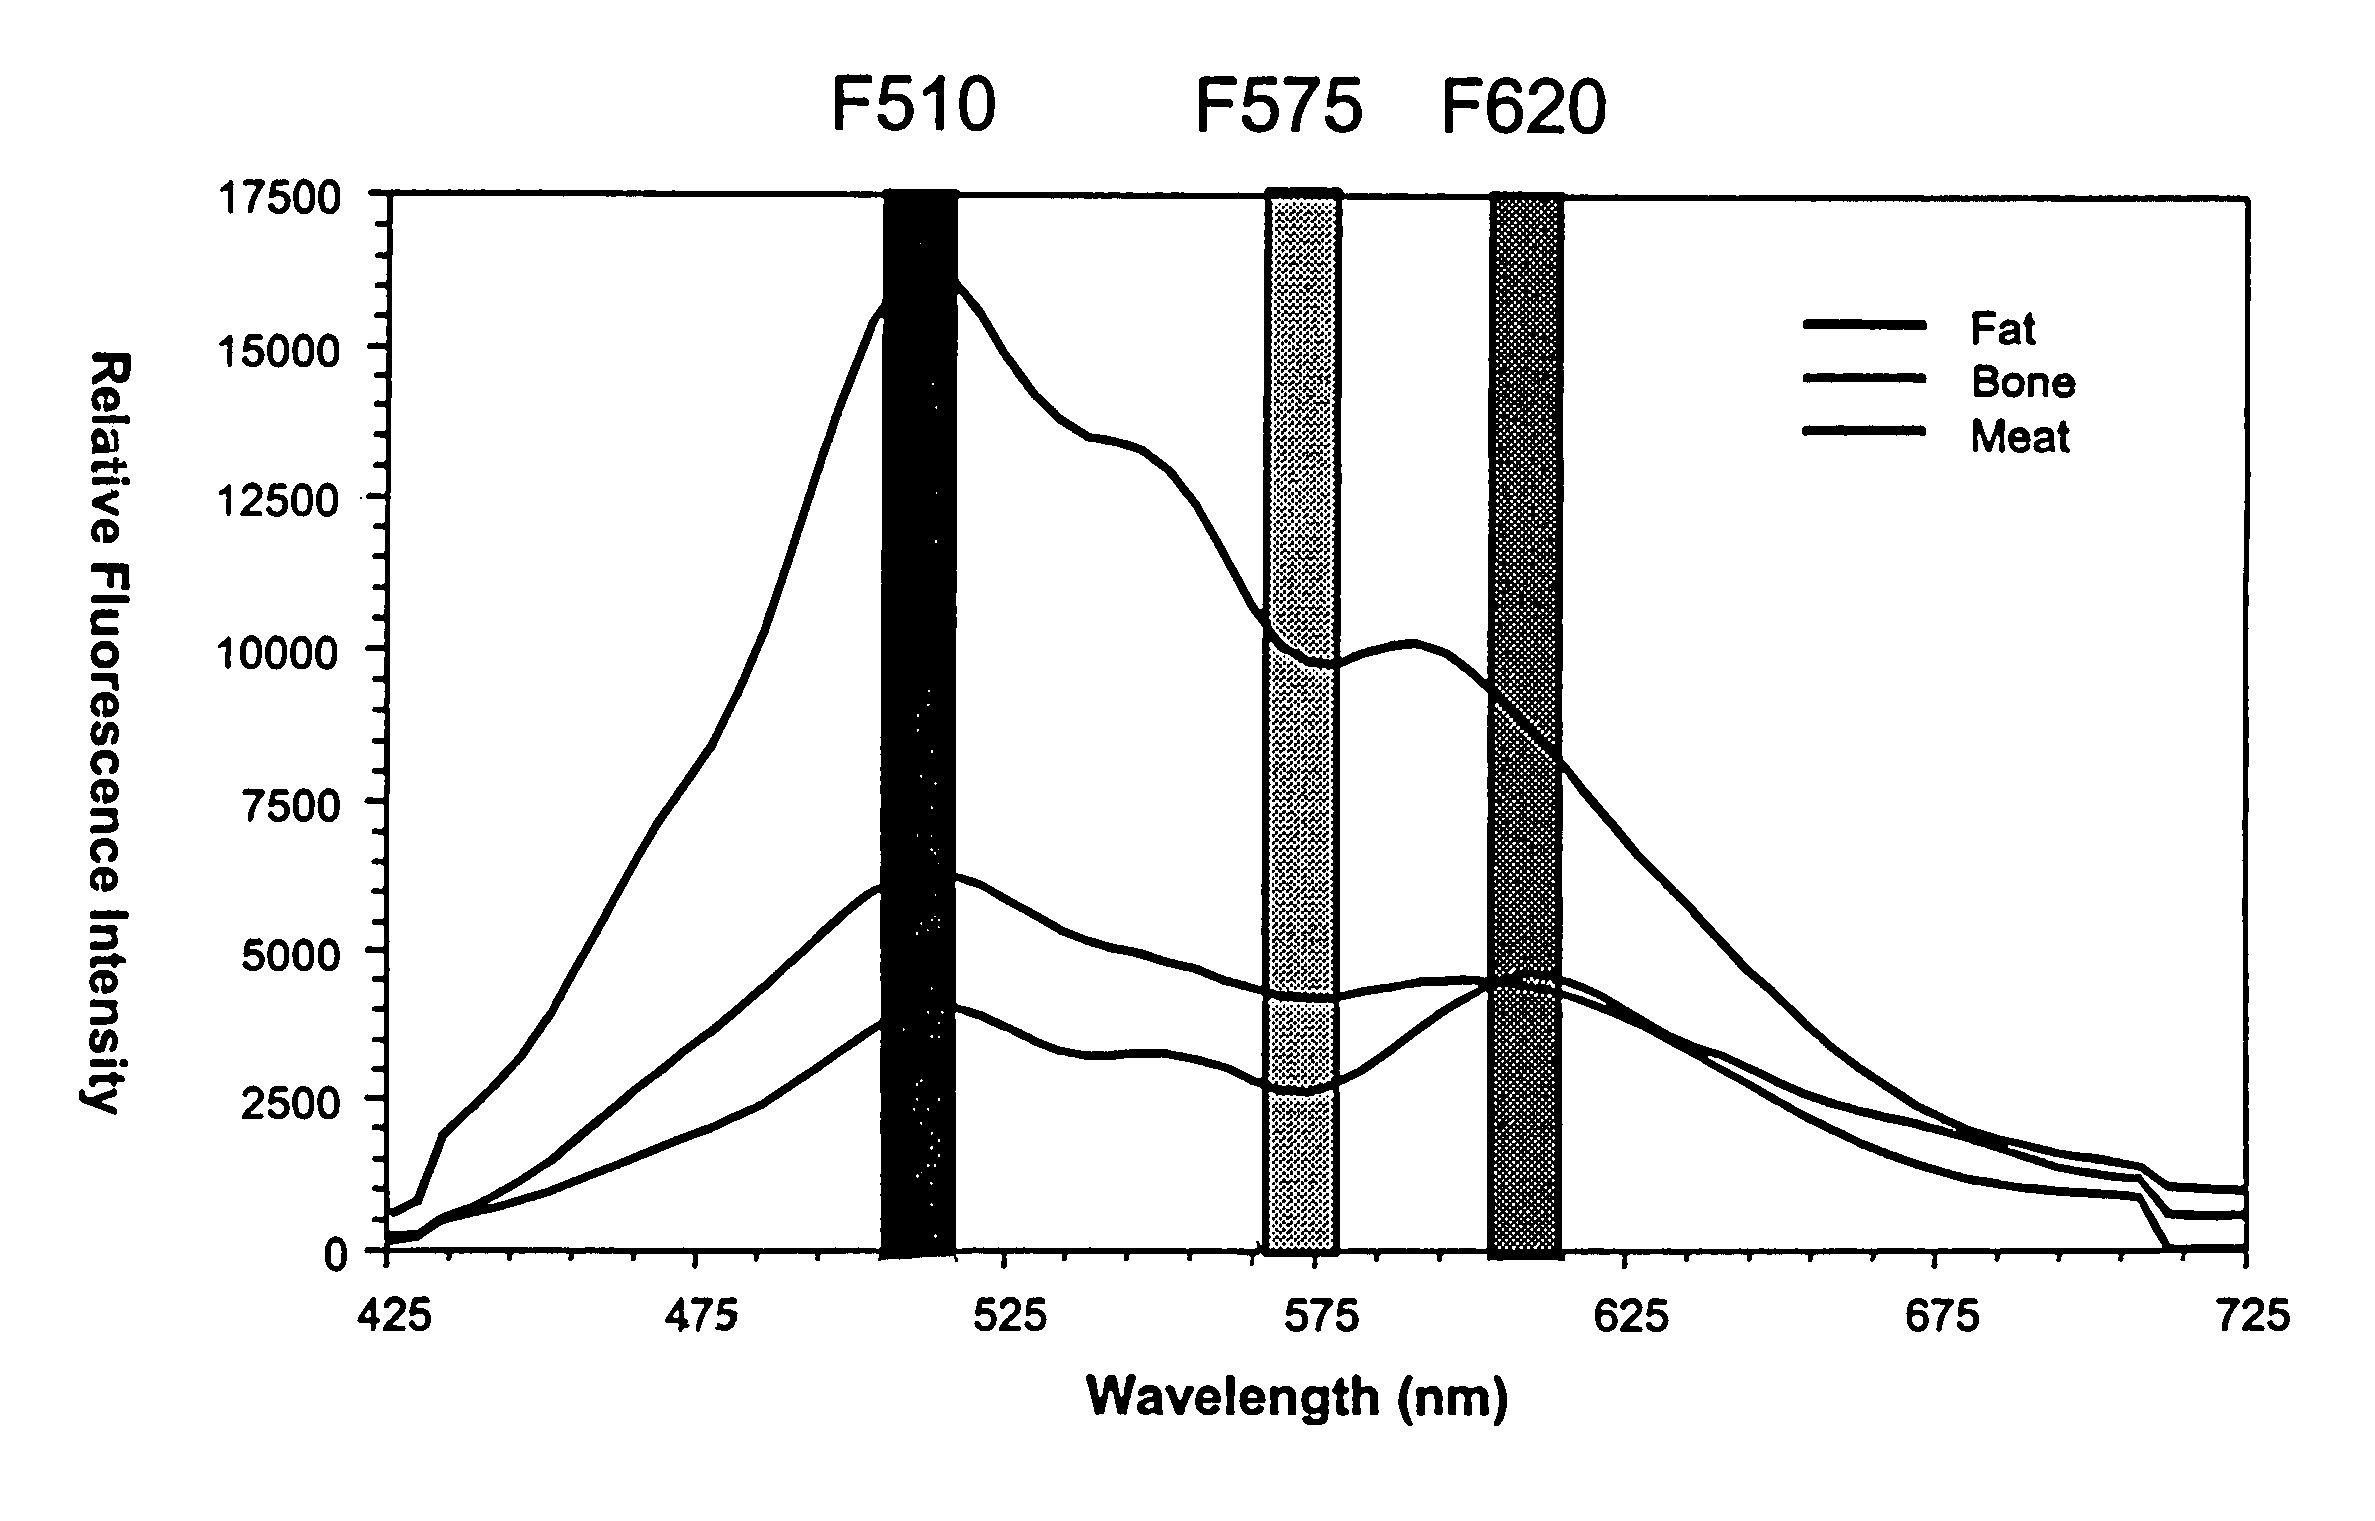 Method to detect bone fragments during the processing of meat or fish